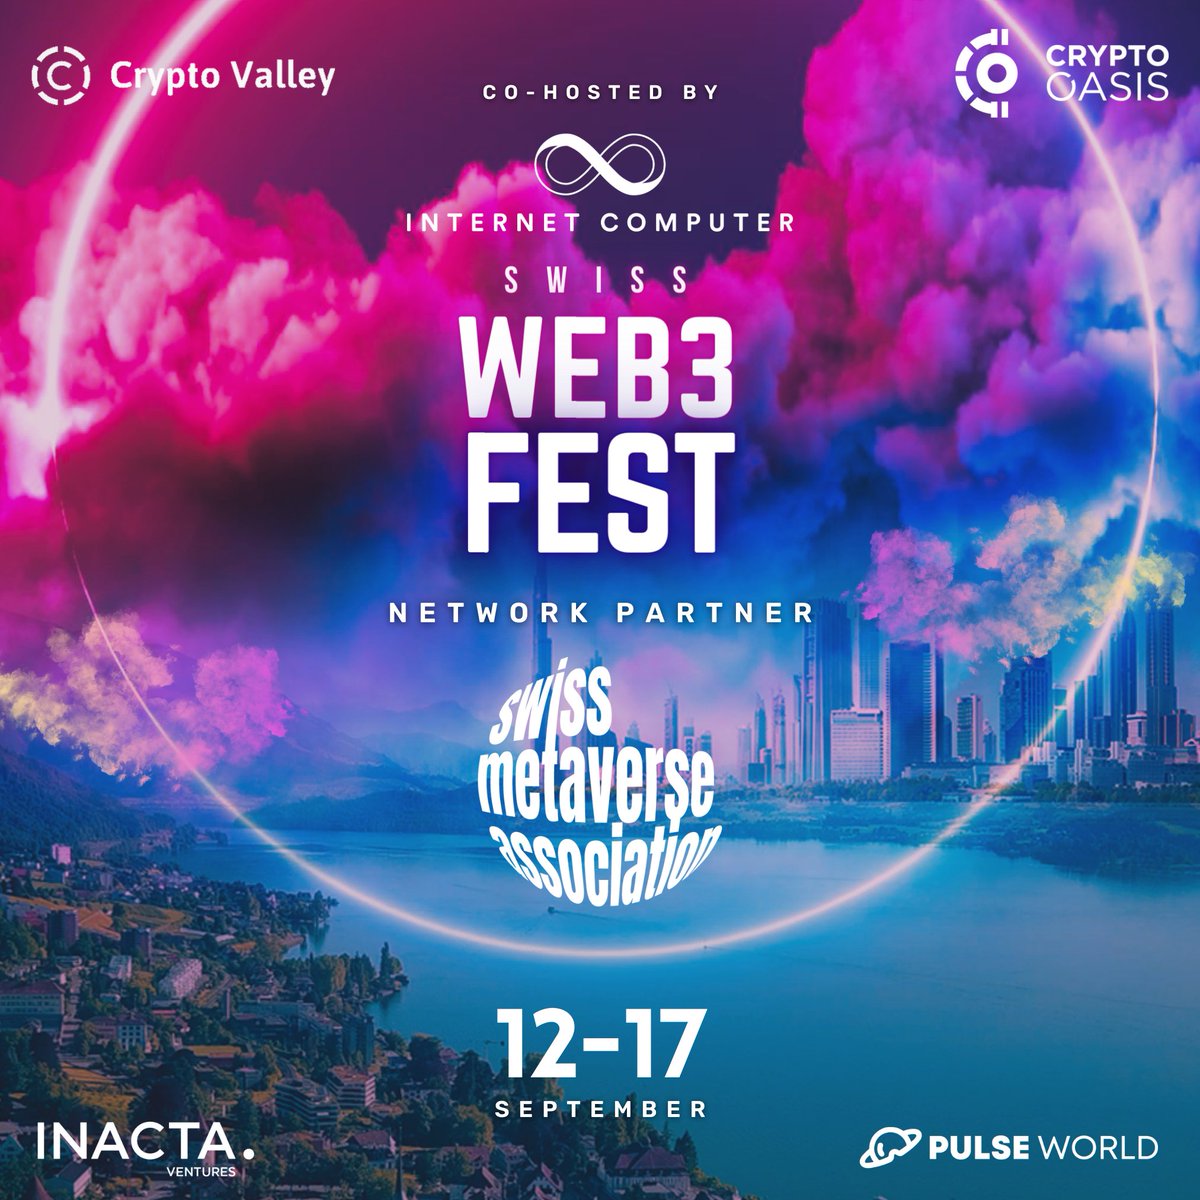 We are excited to announce @SwissMetaverse as Network Partner of the Swiss WEB3FEST and largest Web3 gathering in Switzerland to date!

📅 September 12-17th
📍 Zurich and Zug - Switzerland
🔗 t.ly/dky1u
🎟️FIVE Hotel Discount Code: CVCO23